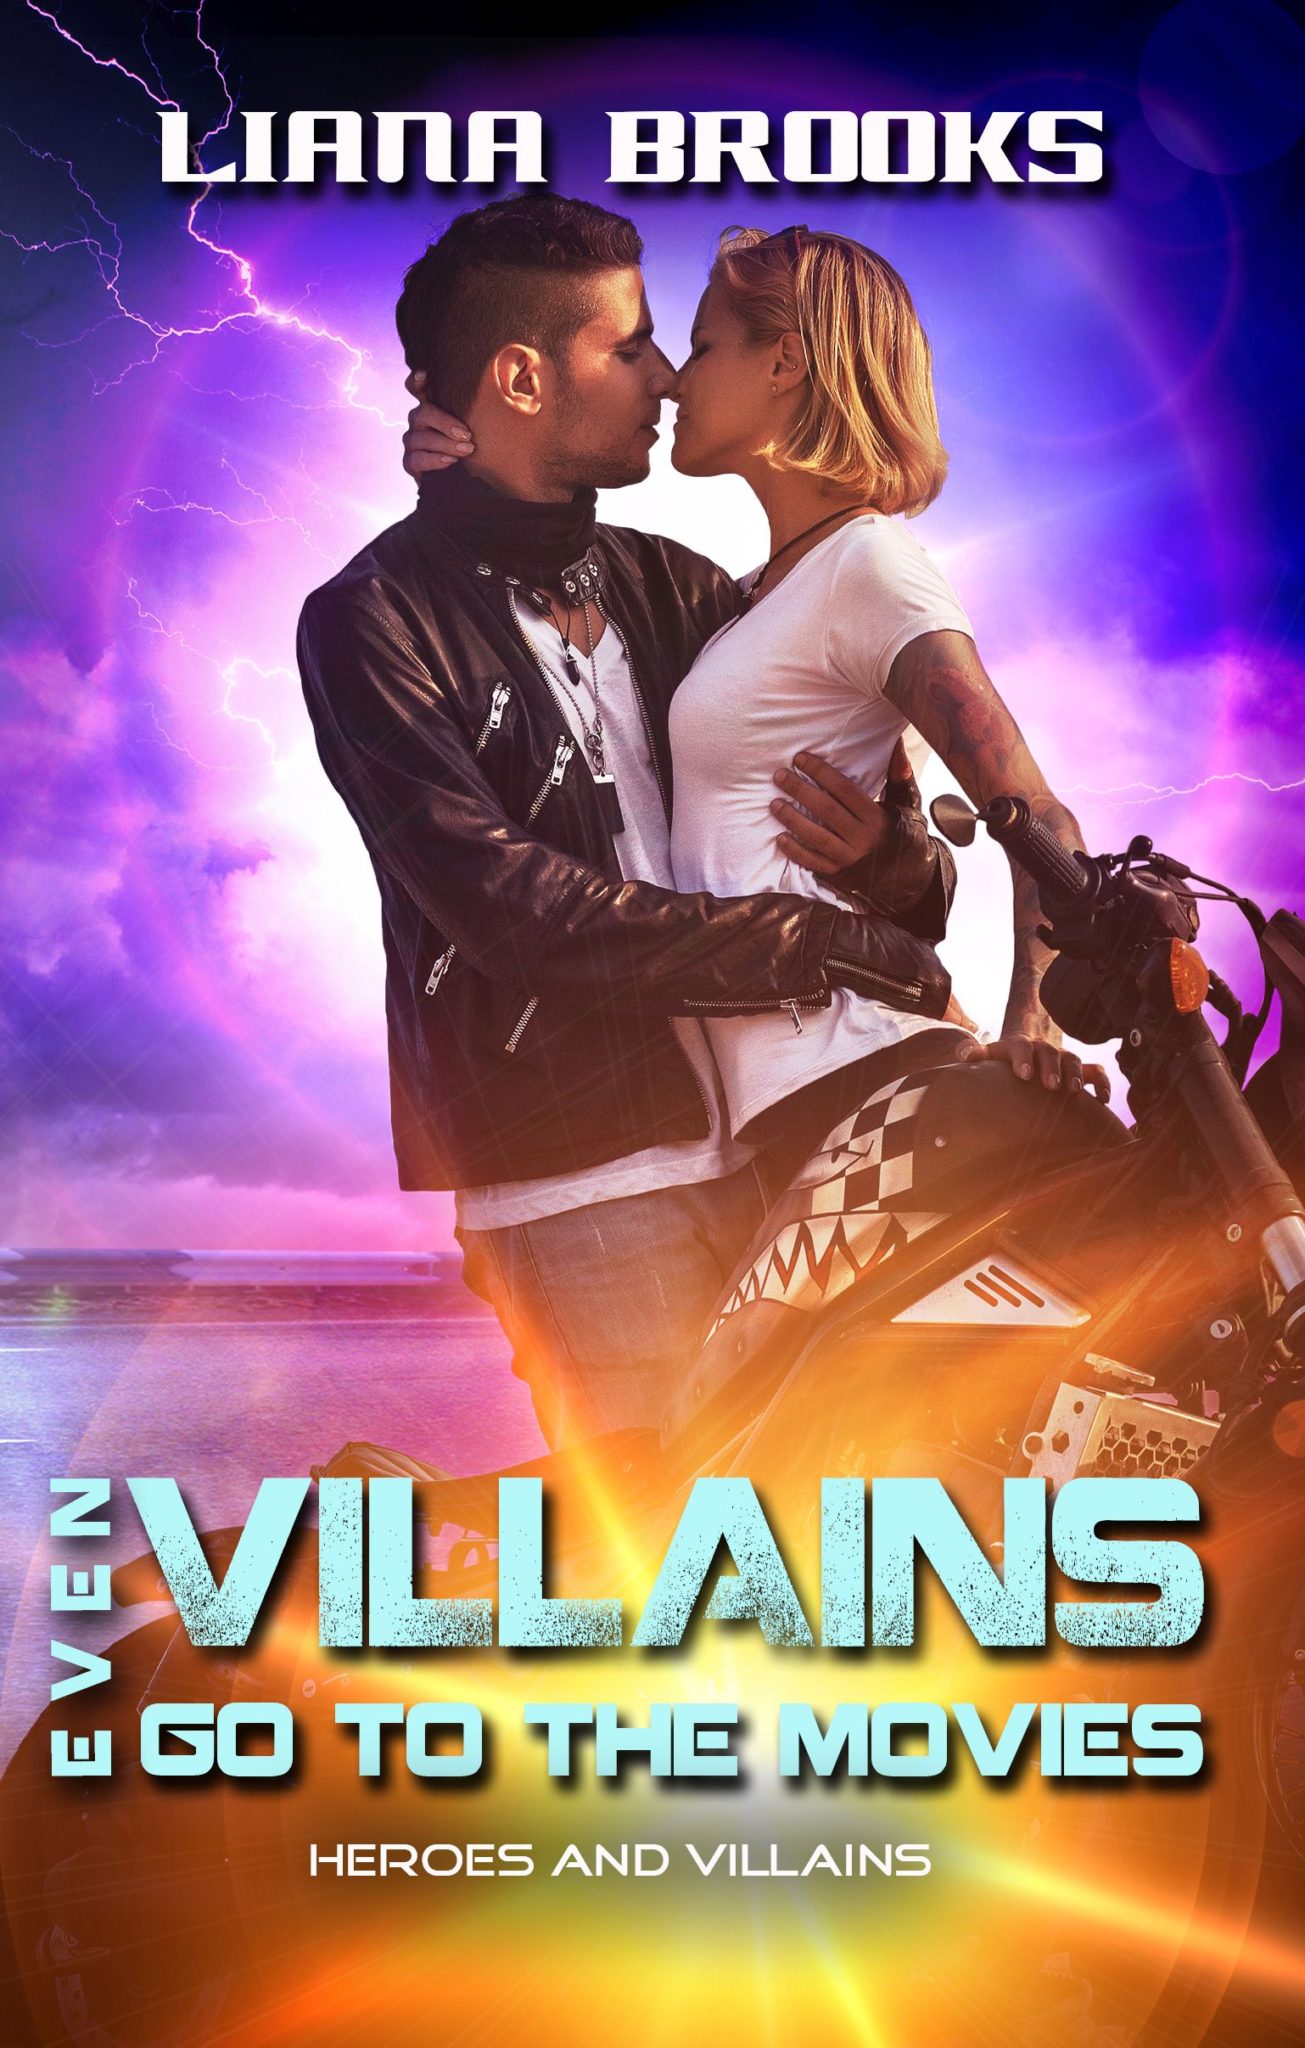 Even Villains Fall In Love by Liana Brooks